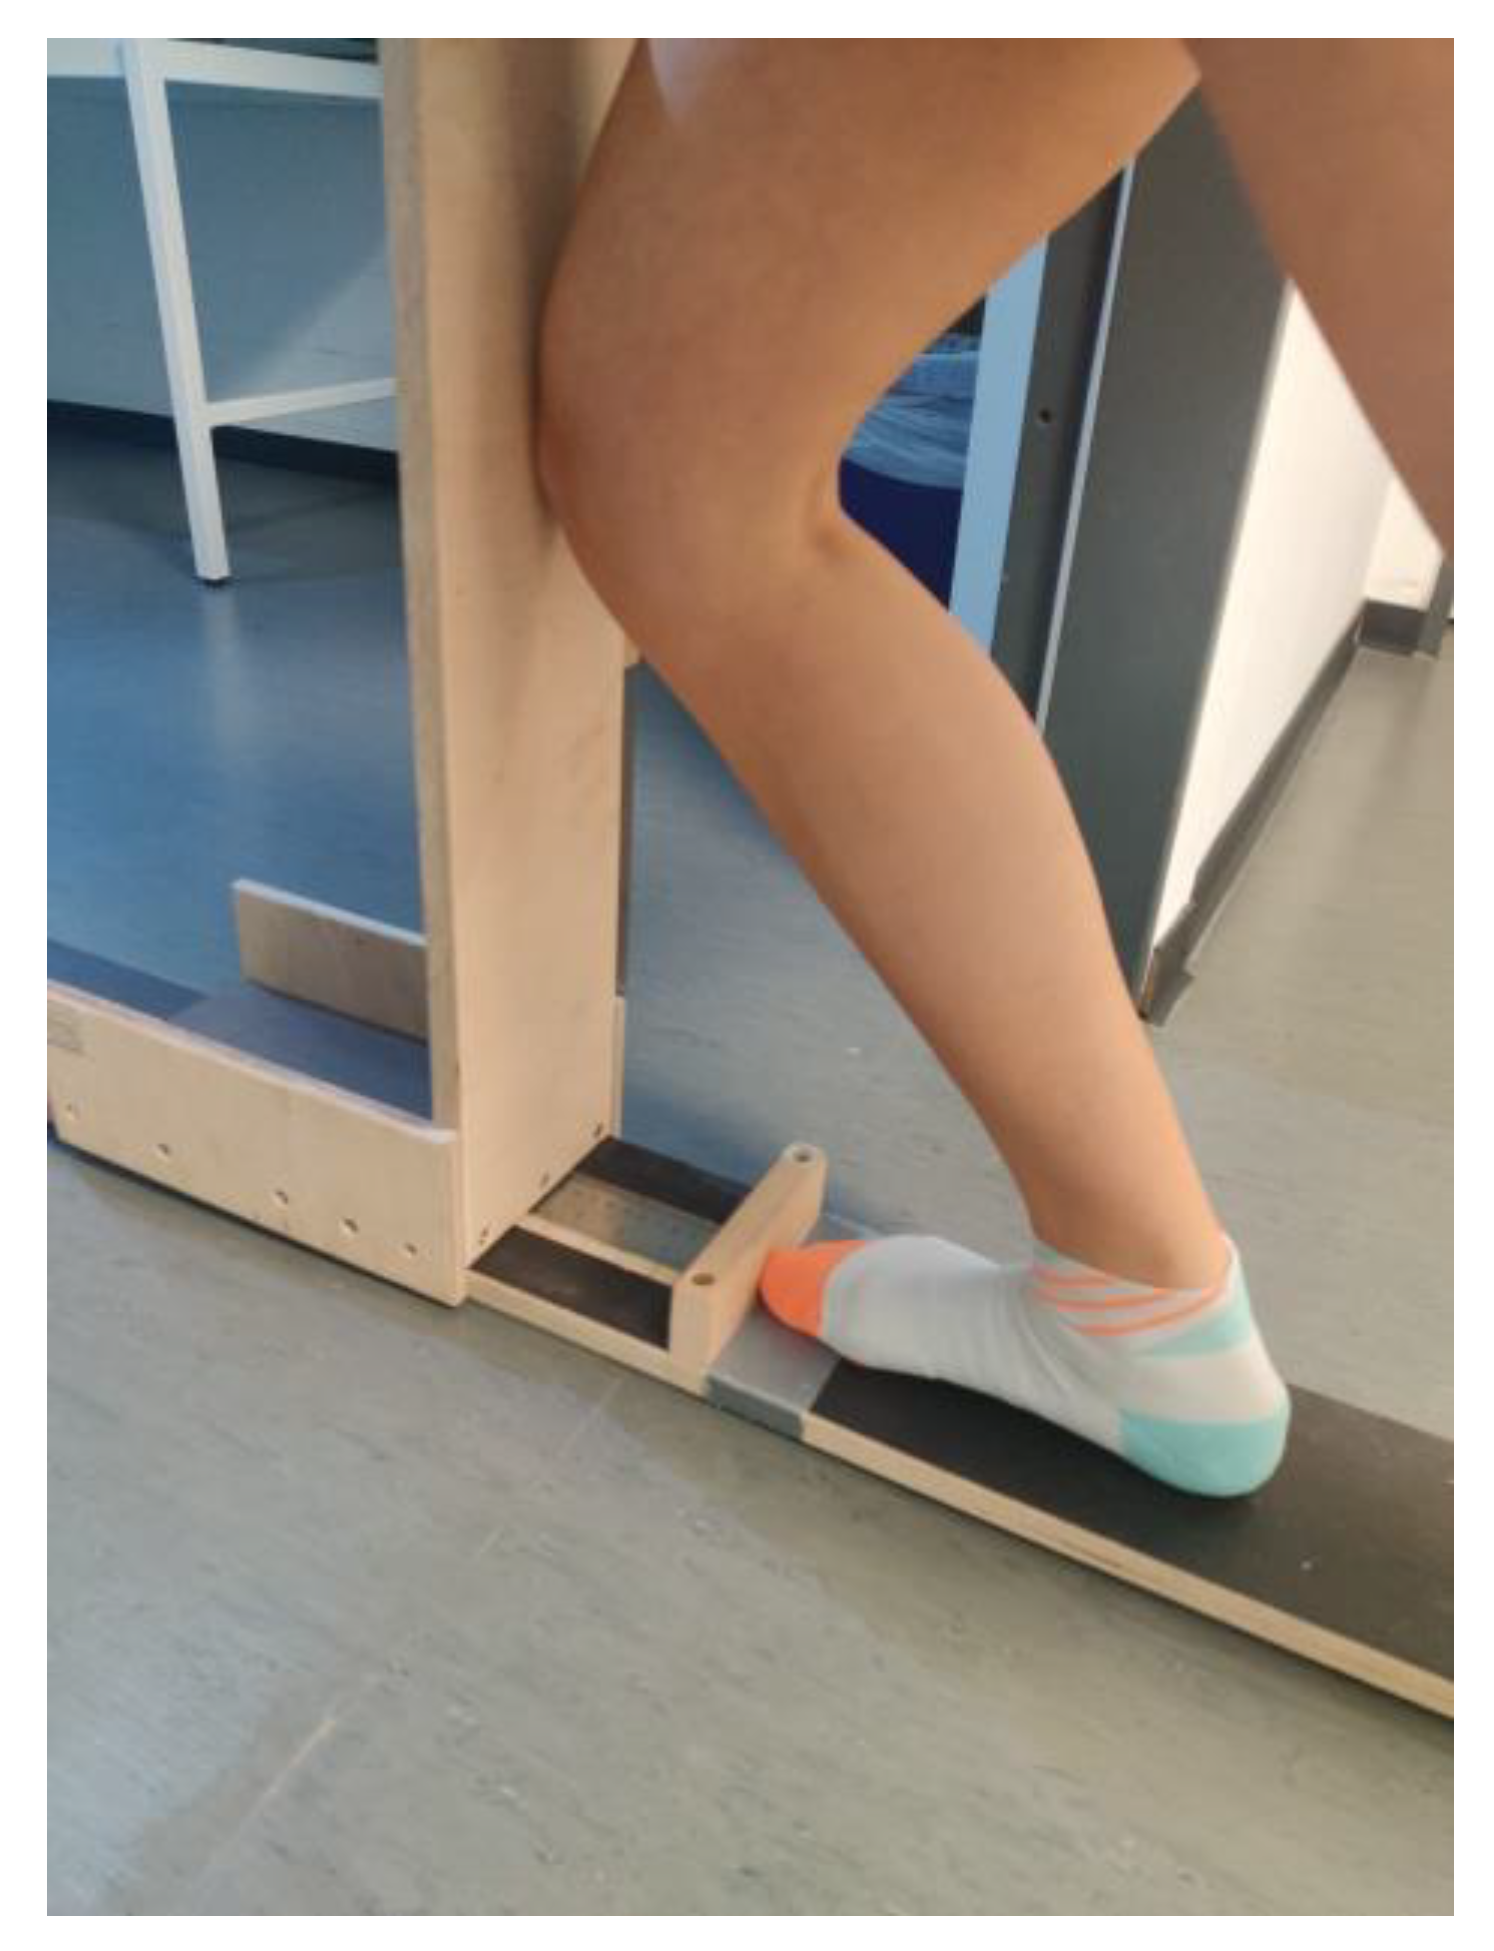 Methods for immobilizing the fractured foot and ankle – Human Kinetics